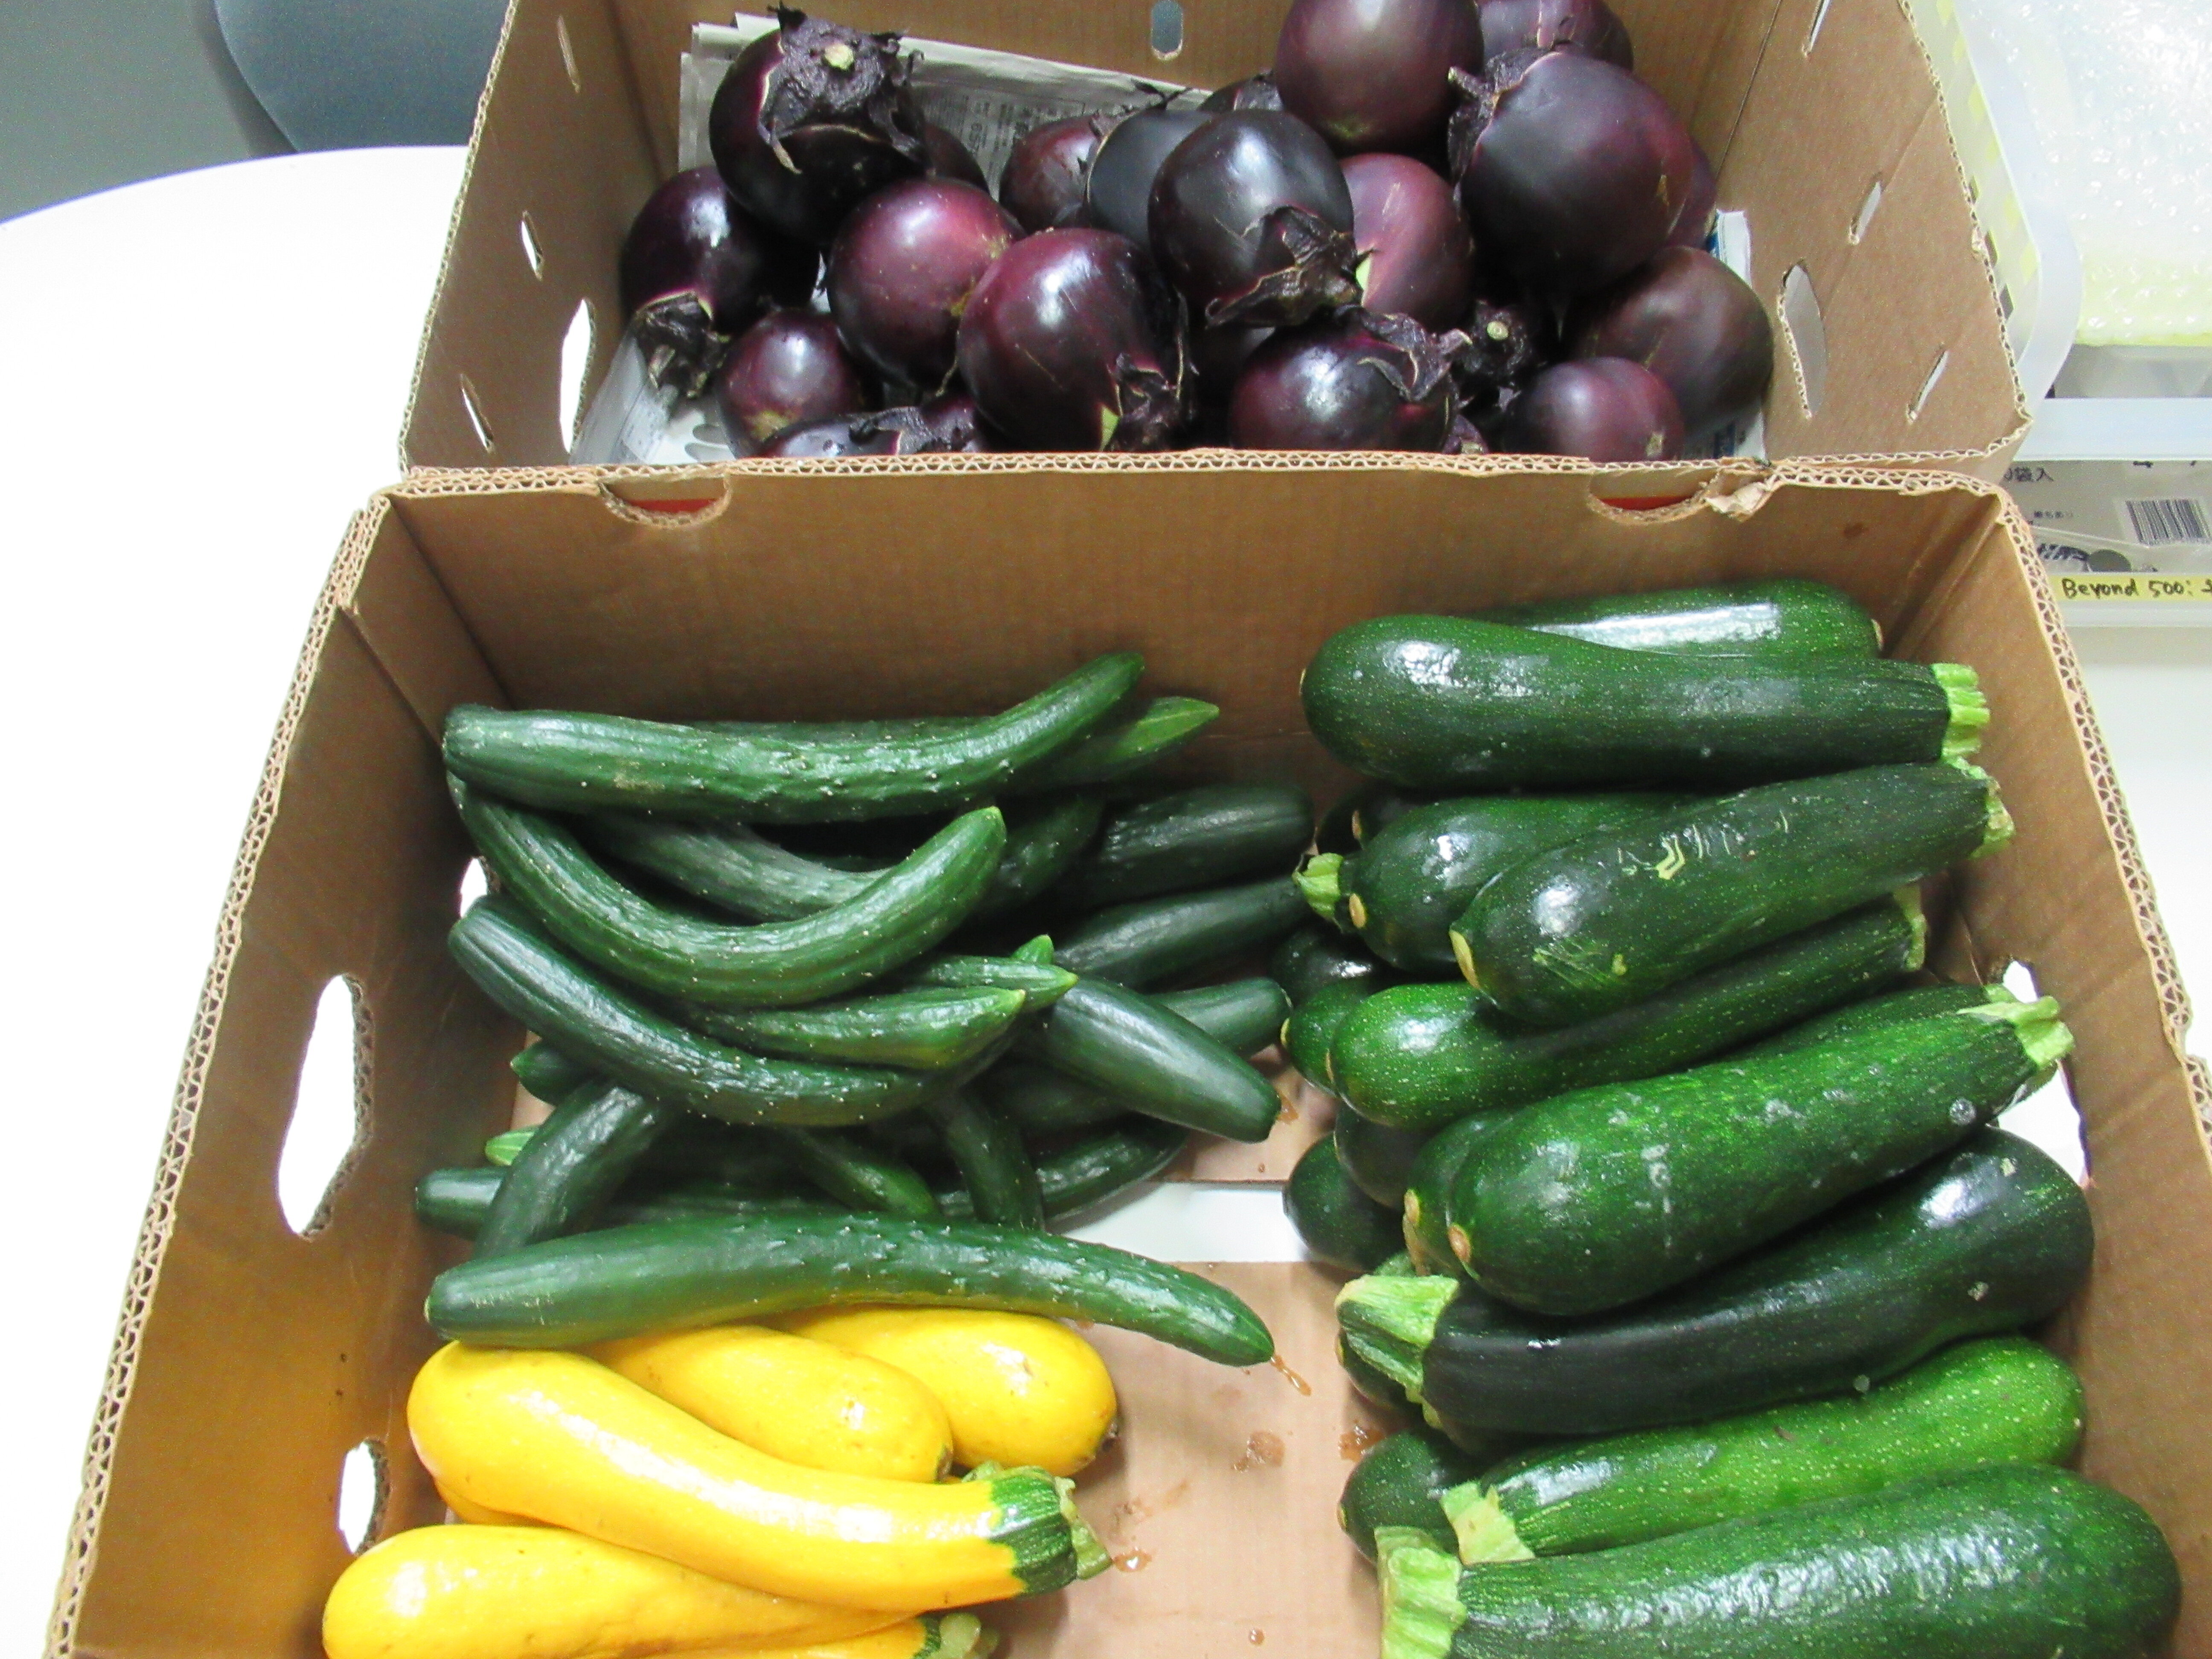 MS. Takahashi donated vegetables(Zucchini, Cucumber, Eggplant) to the international students